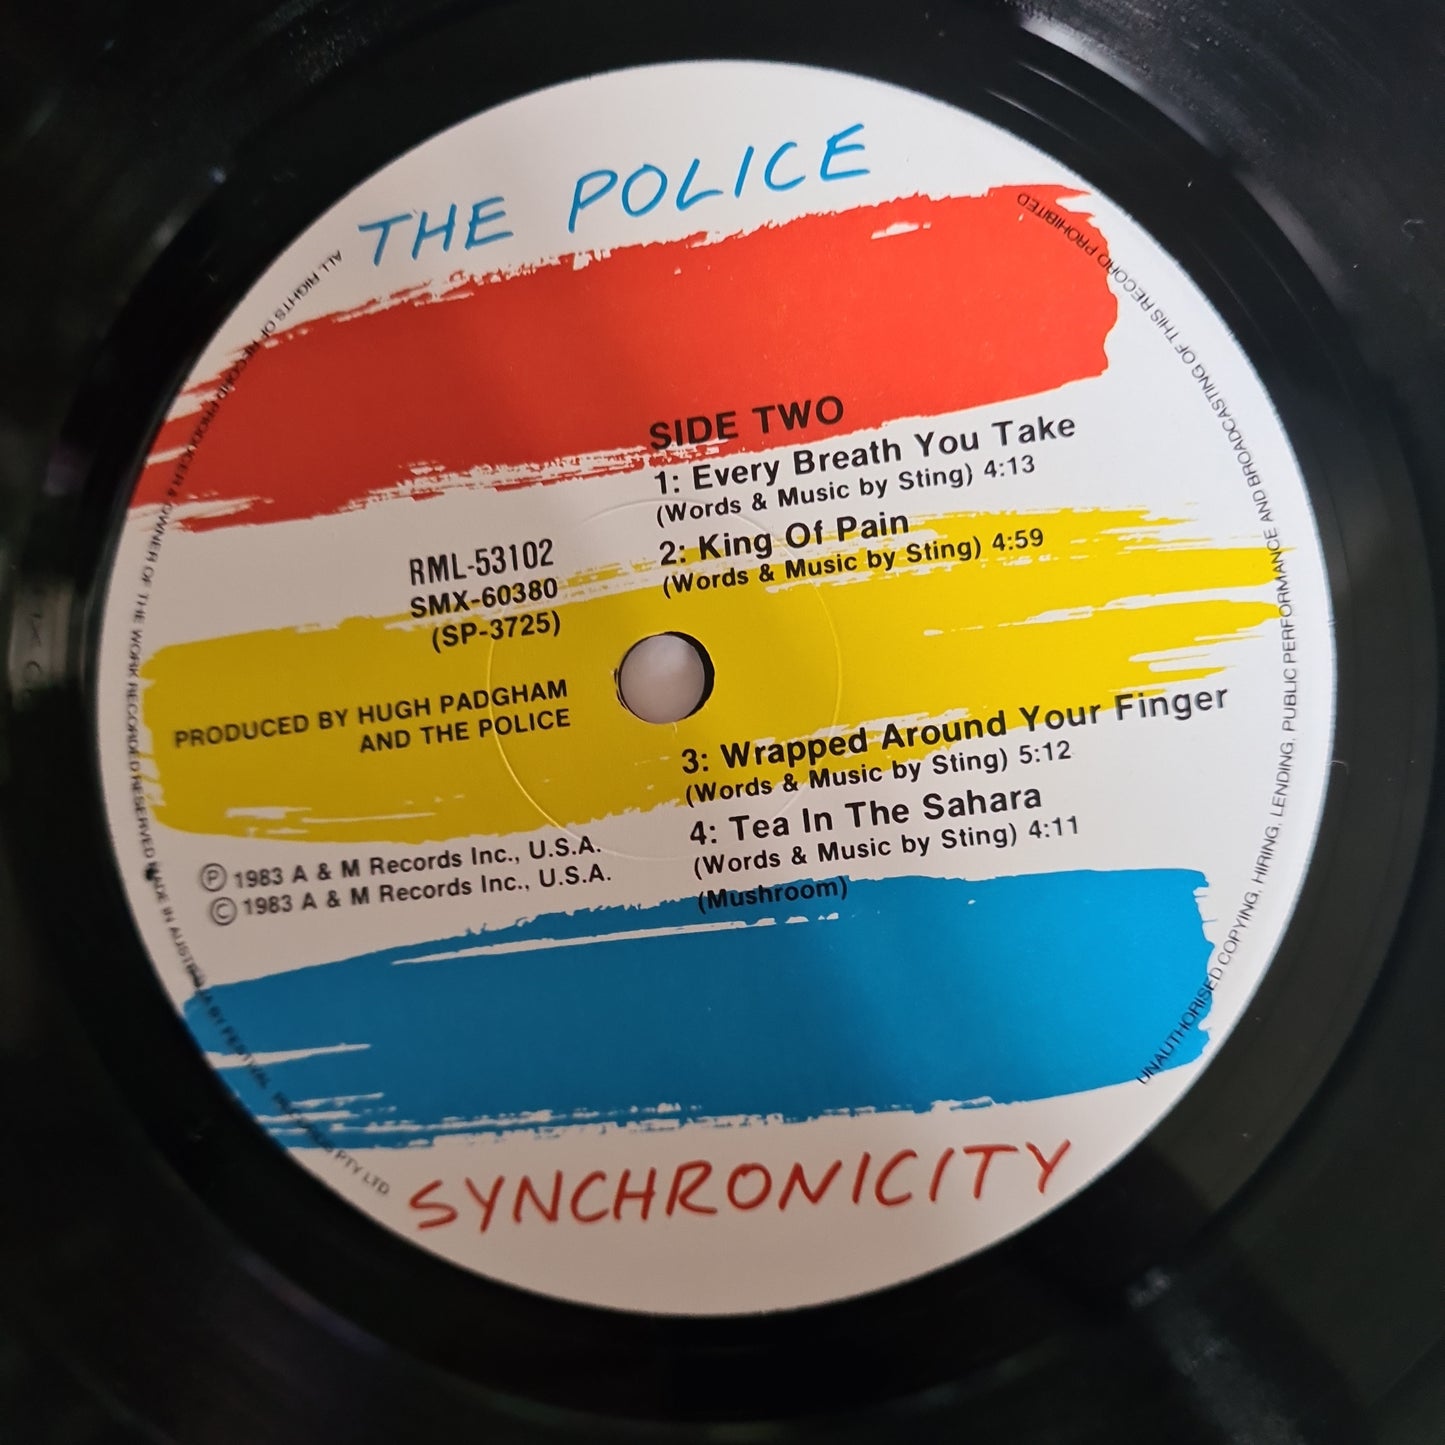 The Police – Synchronicity - 1983 - Vinyl Record